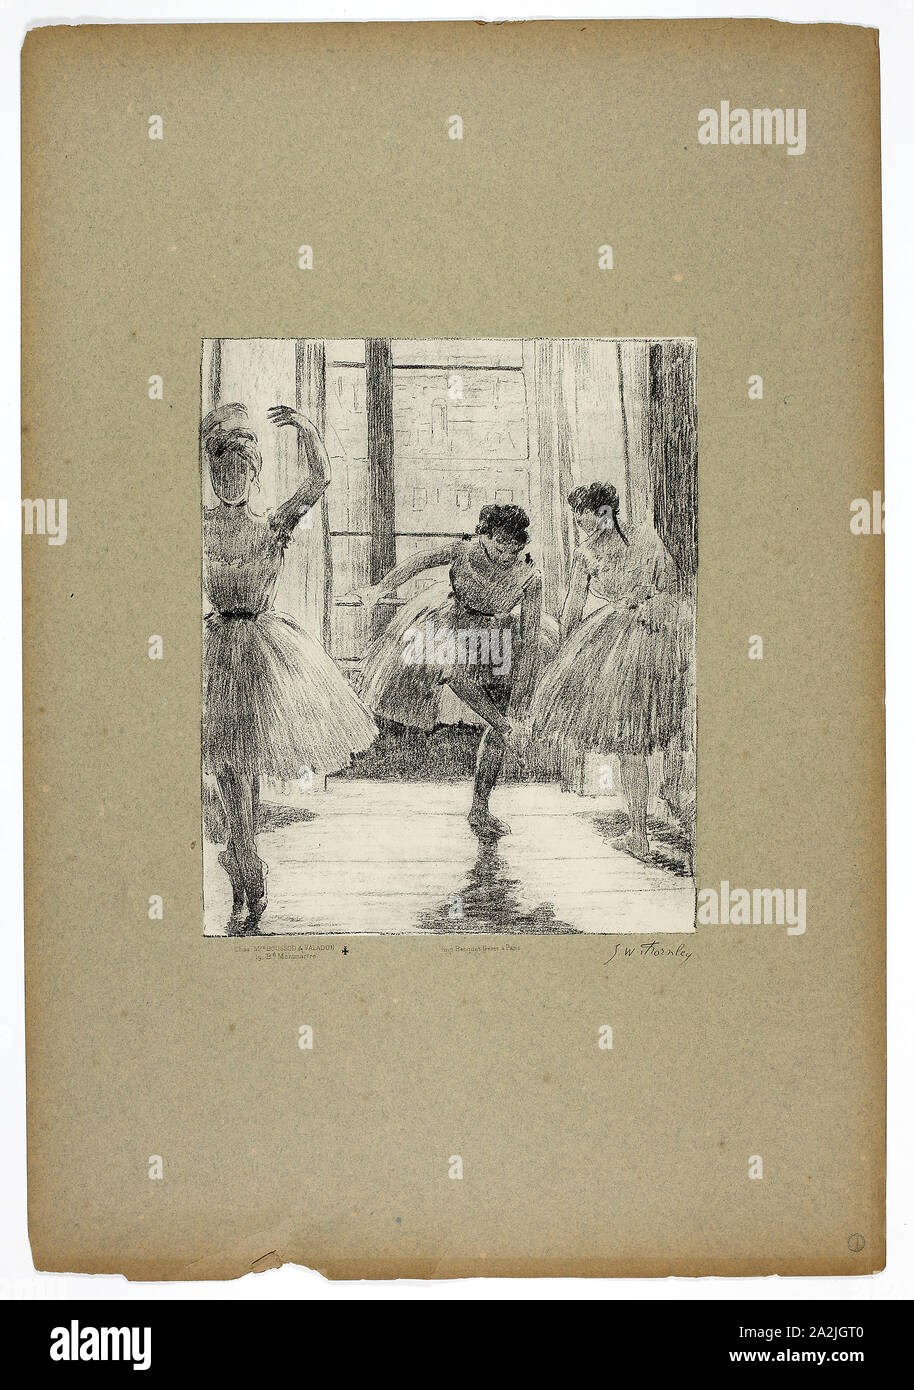 Before the Ballet Class, 1889–90, Georges-William Thornley (French, 1857-1935), after Edgar Degas (French, 1834-1917), printed by Atelier Becquet (French, 19th century), published by Boussod, Valadon, & Company (French, 18th-19th century), France, Lithograph in black on paper, 271 × 223 mm (image),  568 × 397 mm (sheet Stock Photo